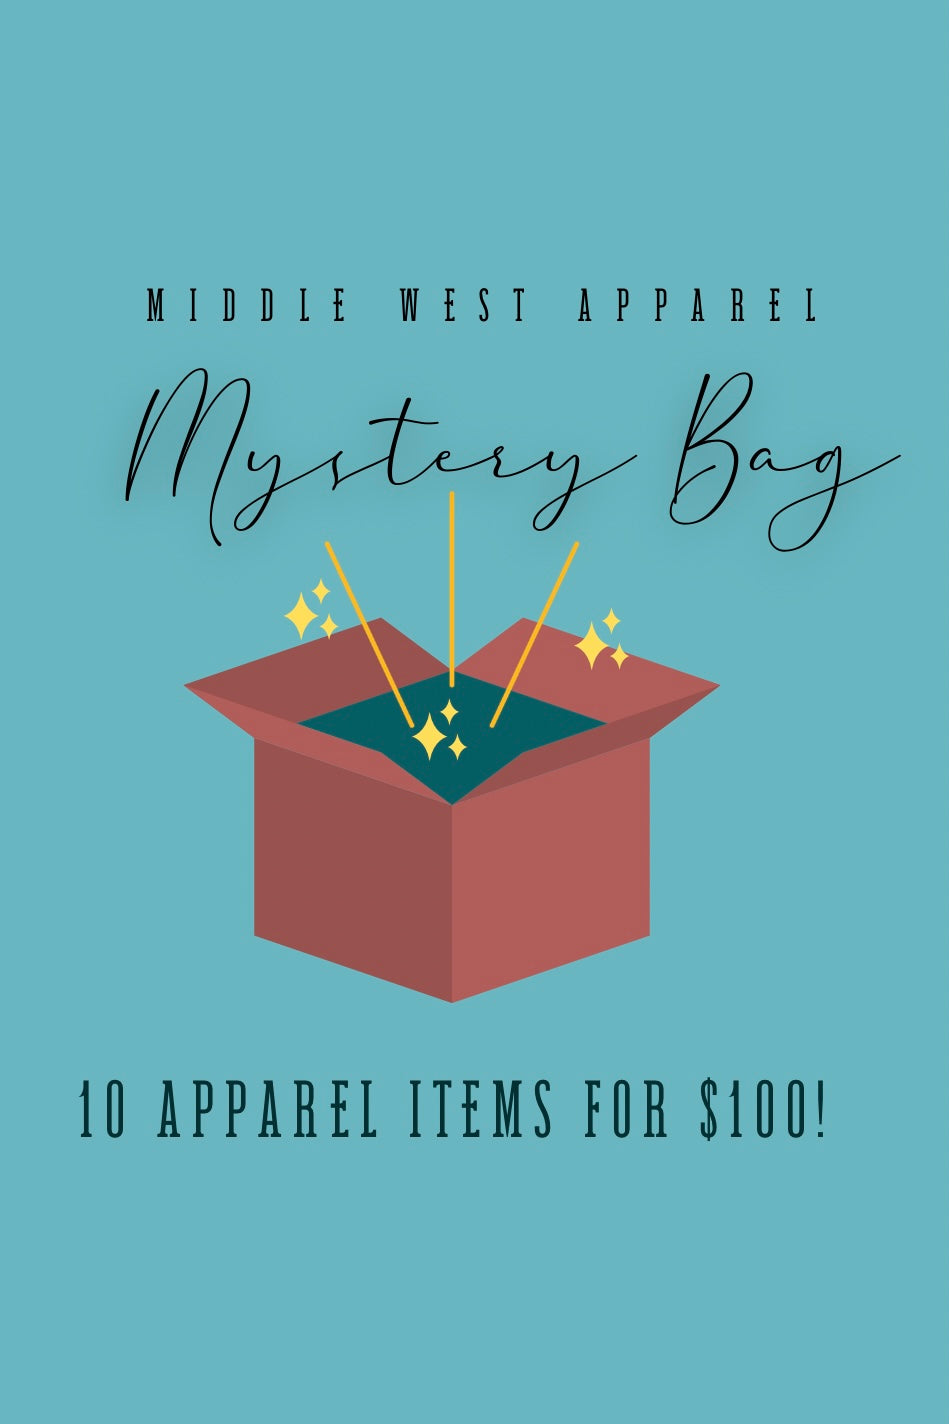 Mystery Bag (10 Apparel Items) - Middle West Apparel